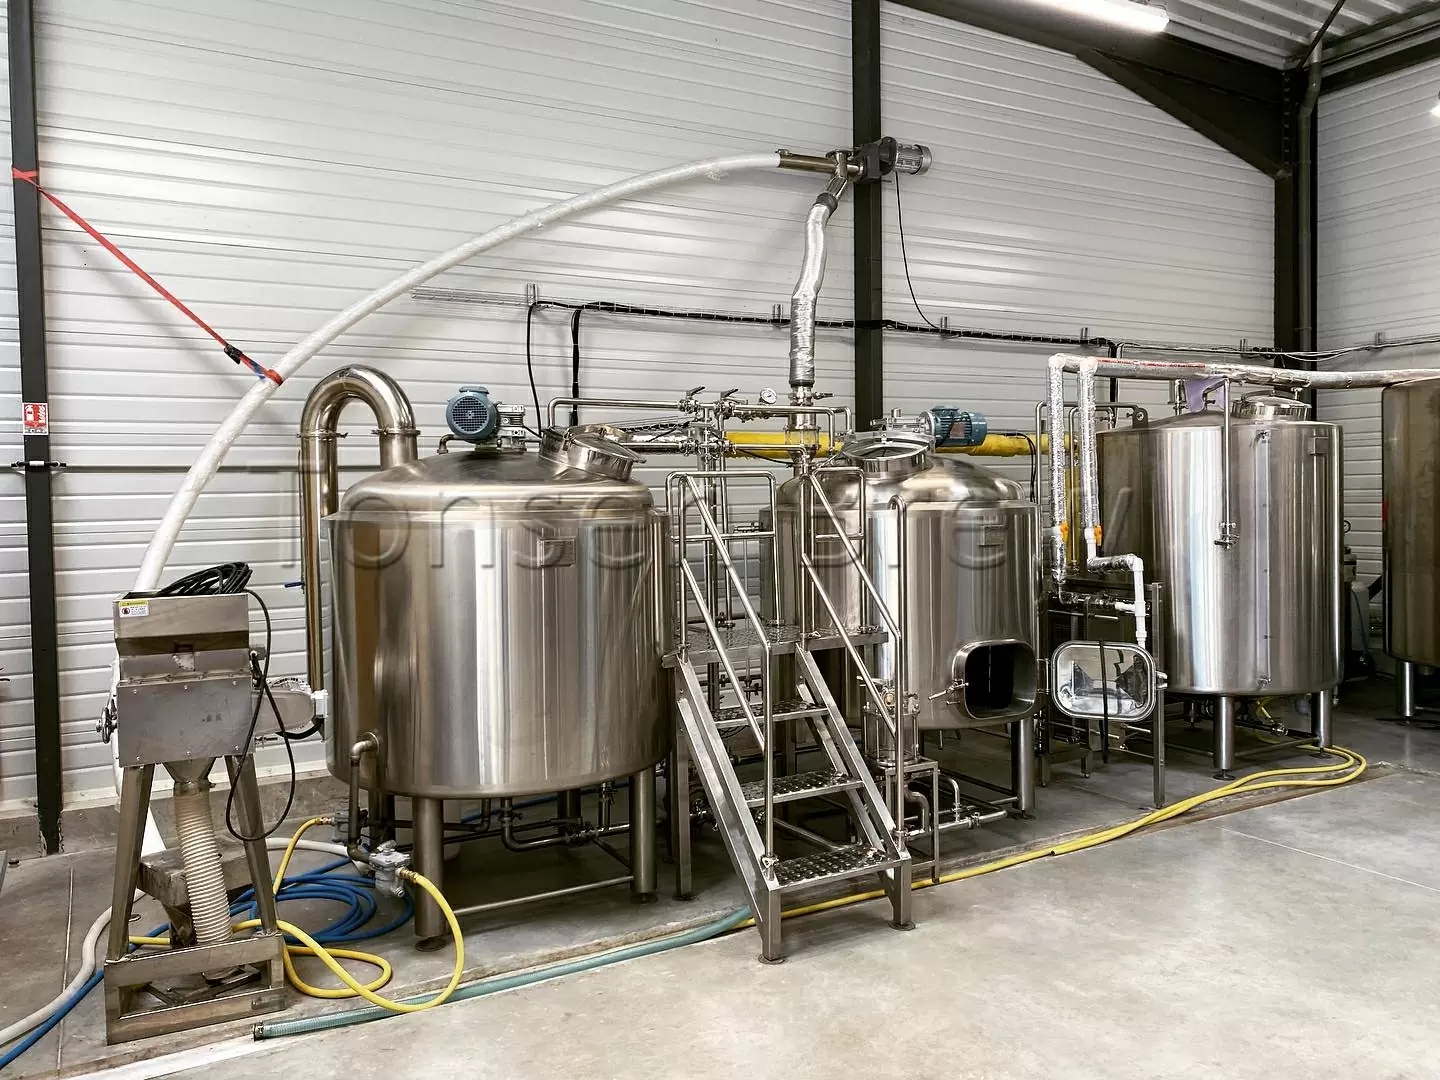 New 1000L brewhouse and fermentation tanks in Europe brewery.